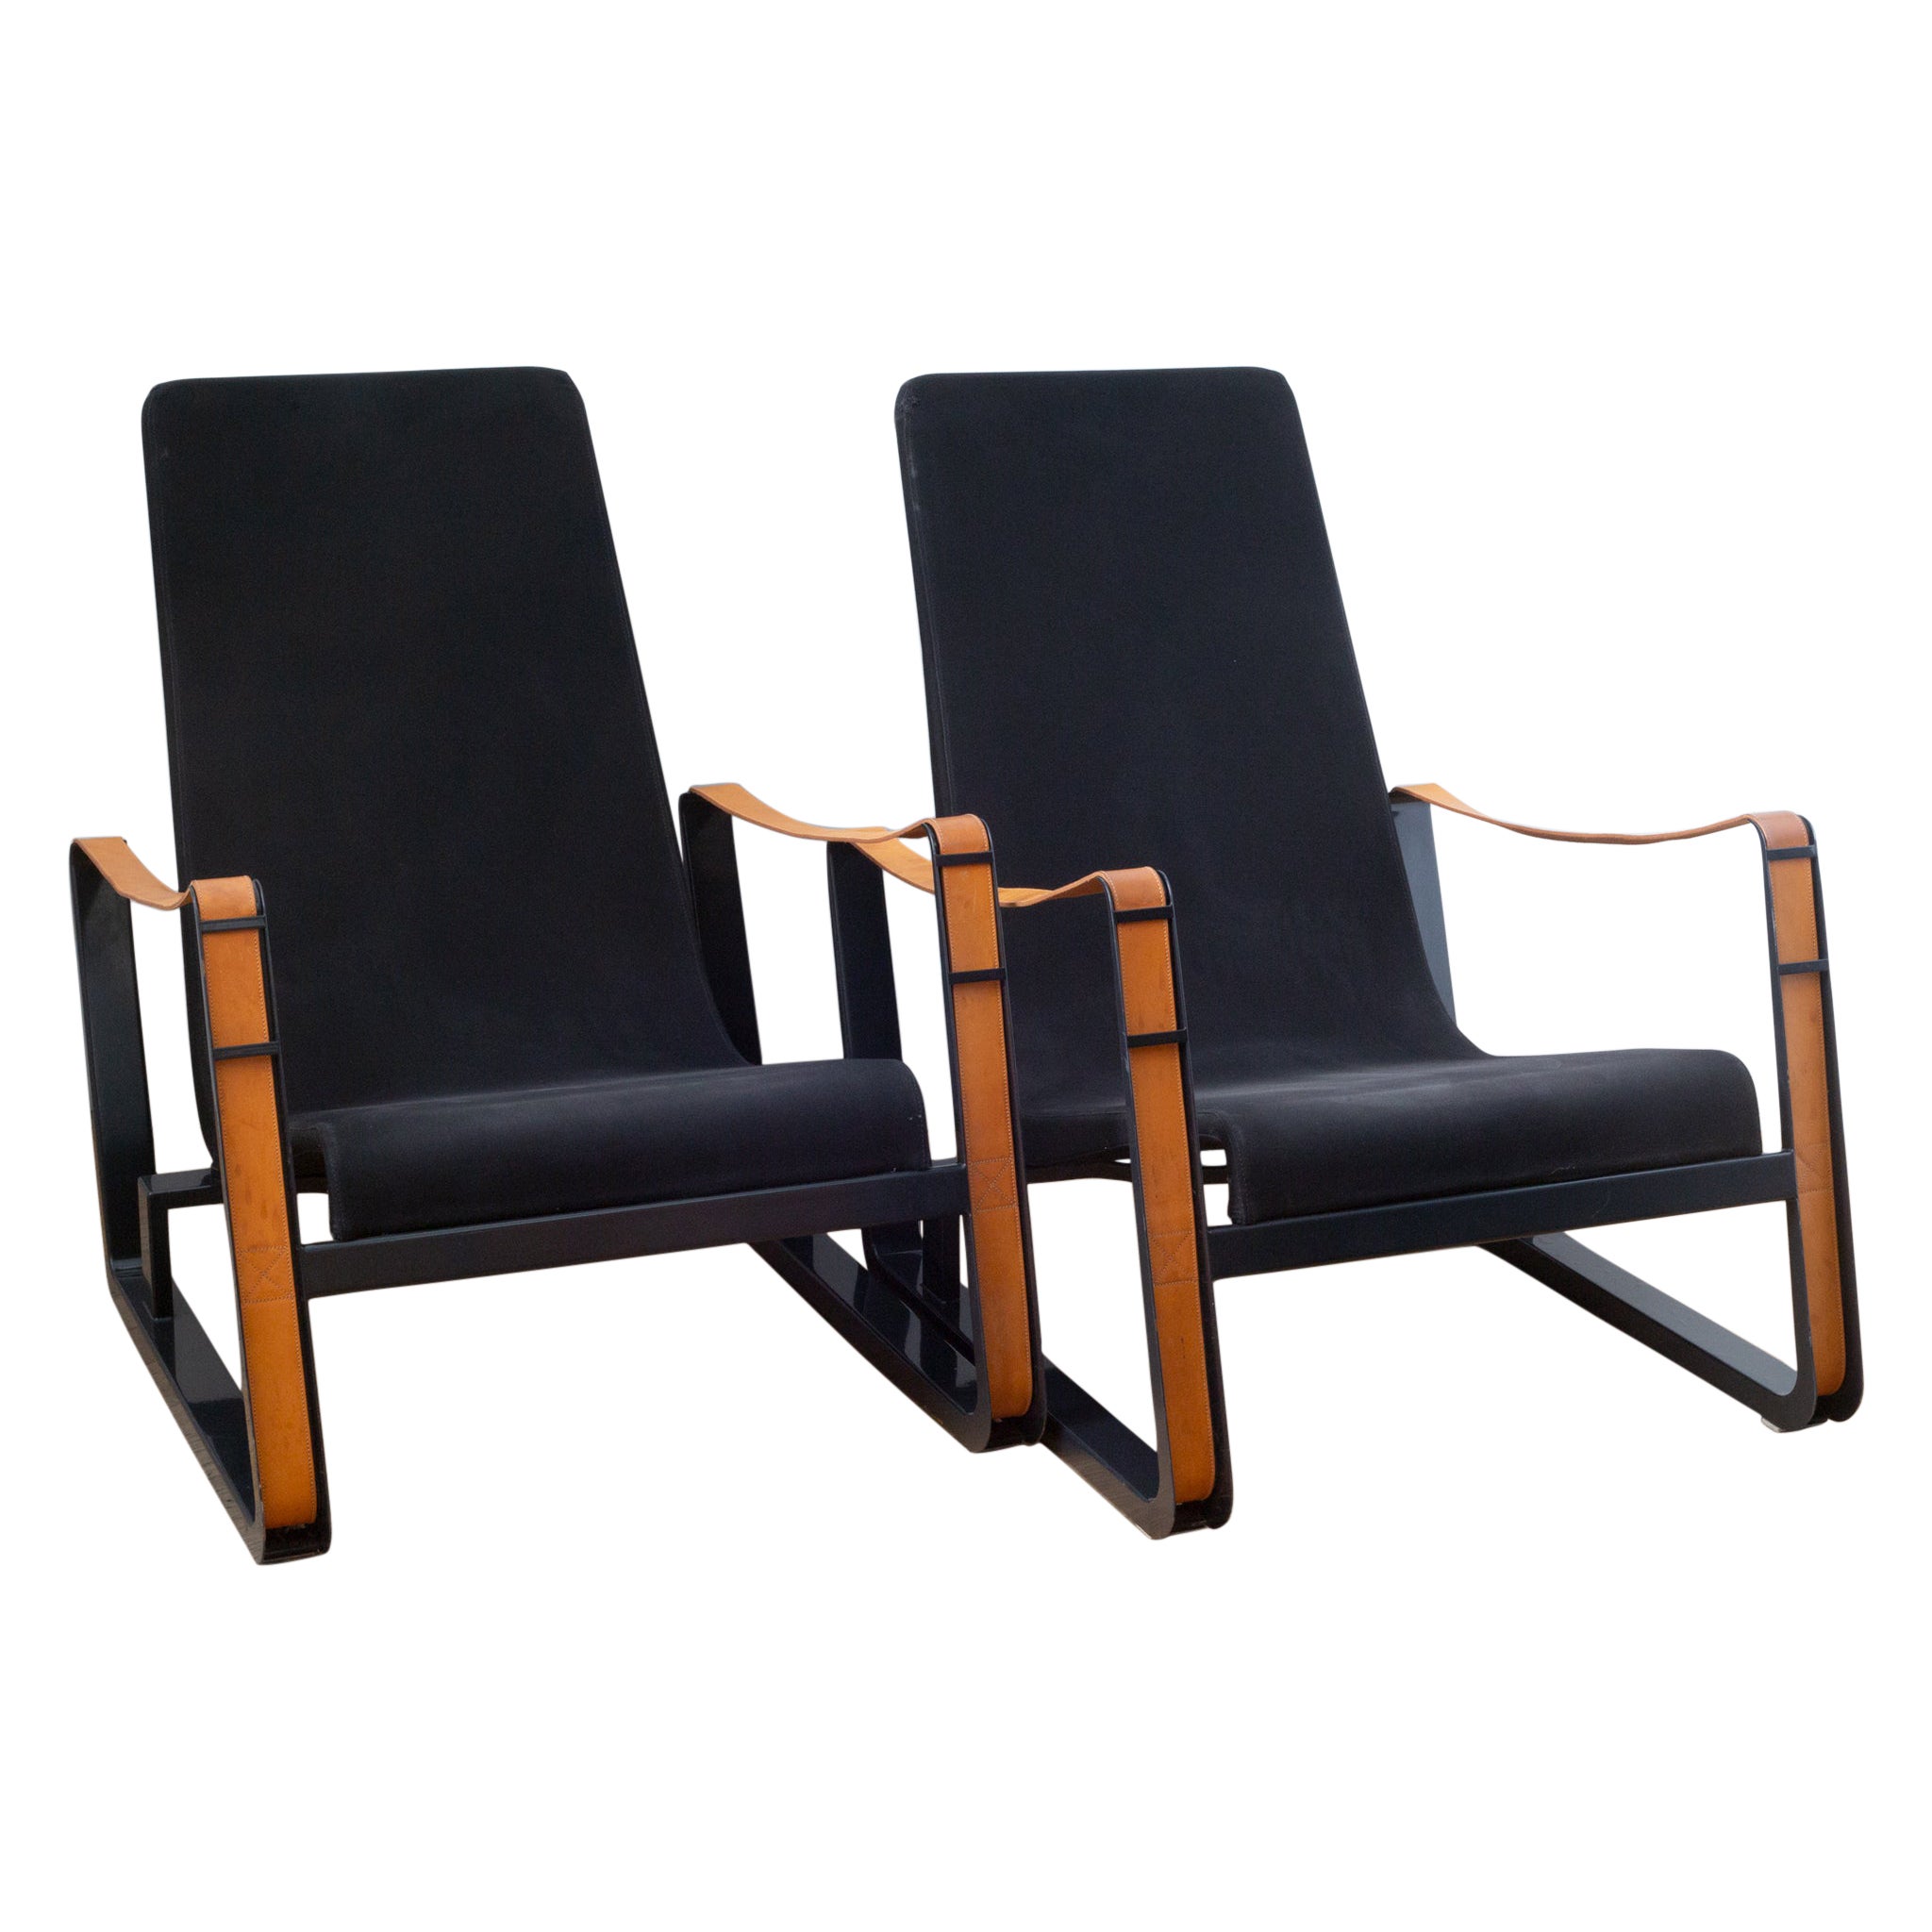 Jean Prouve Cite Lounge Chairs by Vitra-One available